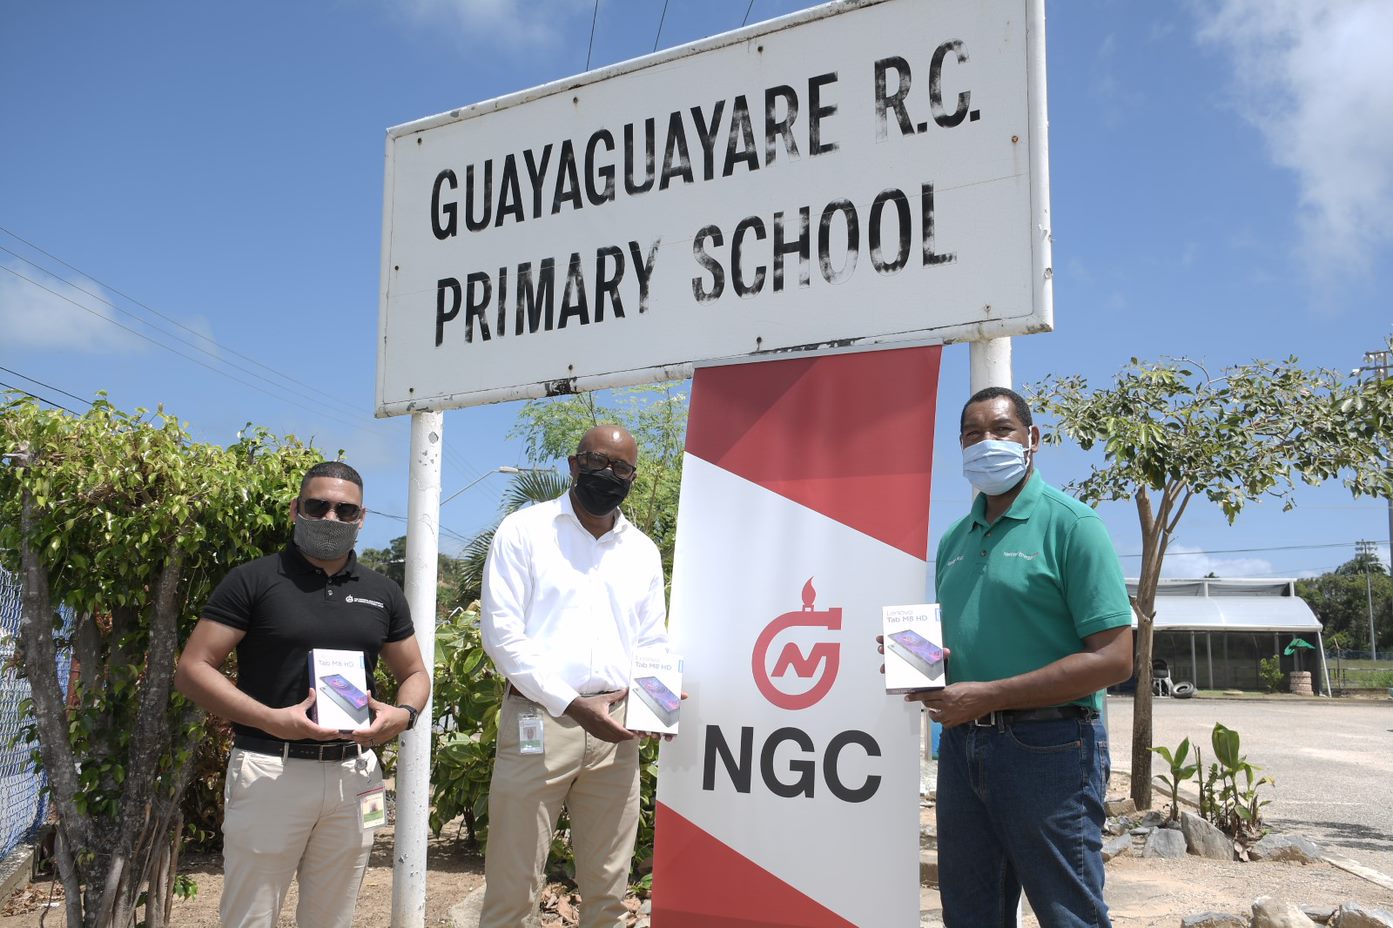 NGC and subsidiaries making sure no child is left behind